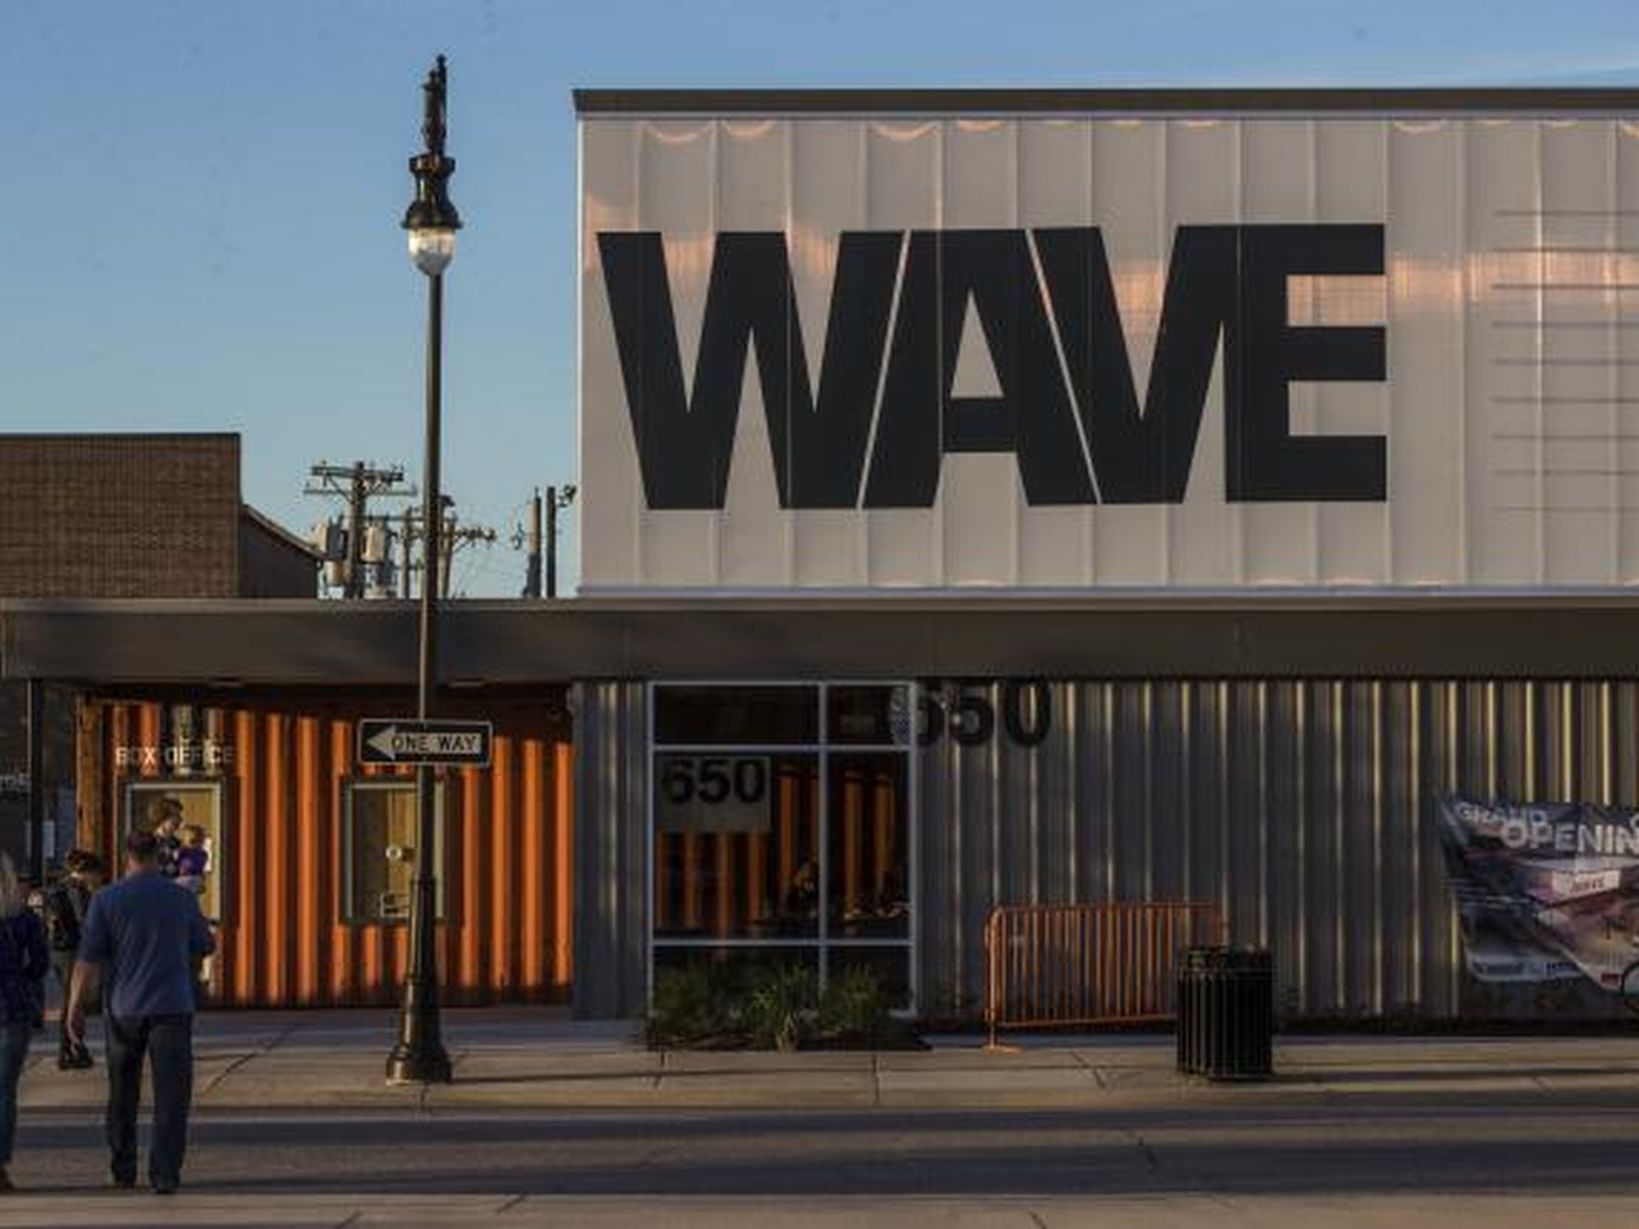 Exterior view of The Wave near Hotel at Old Town